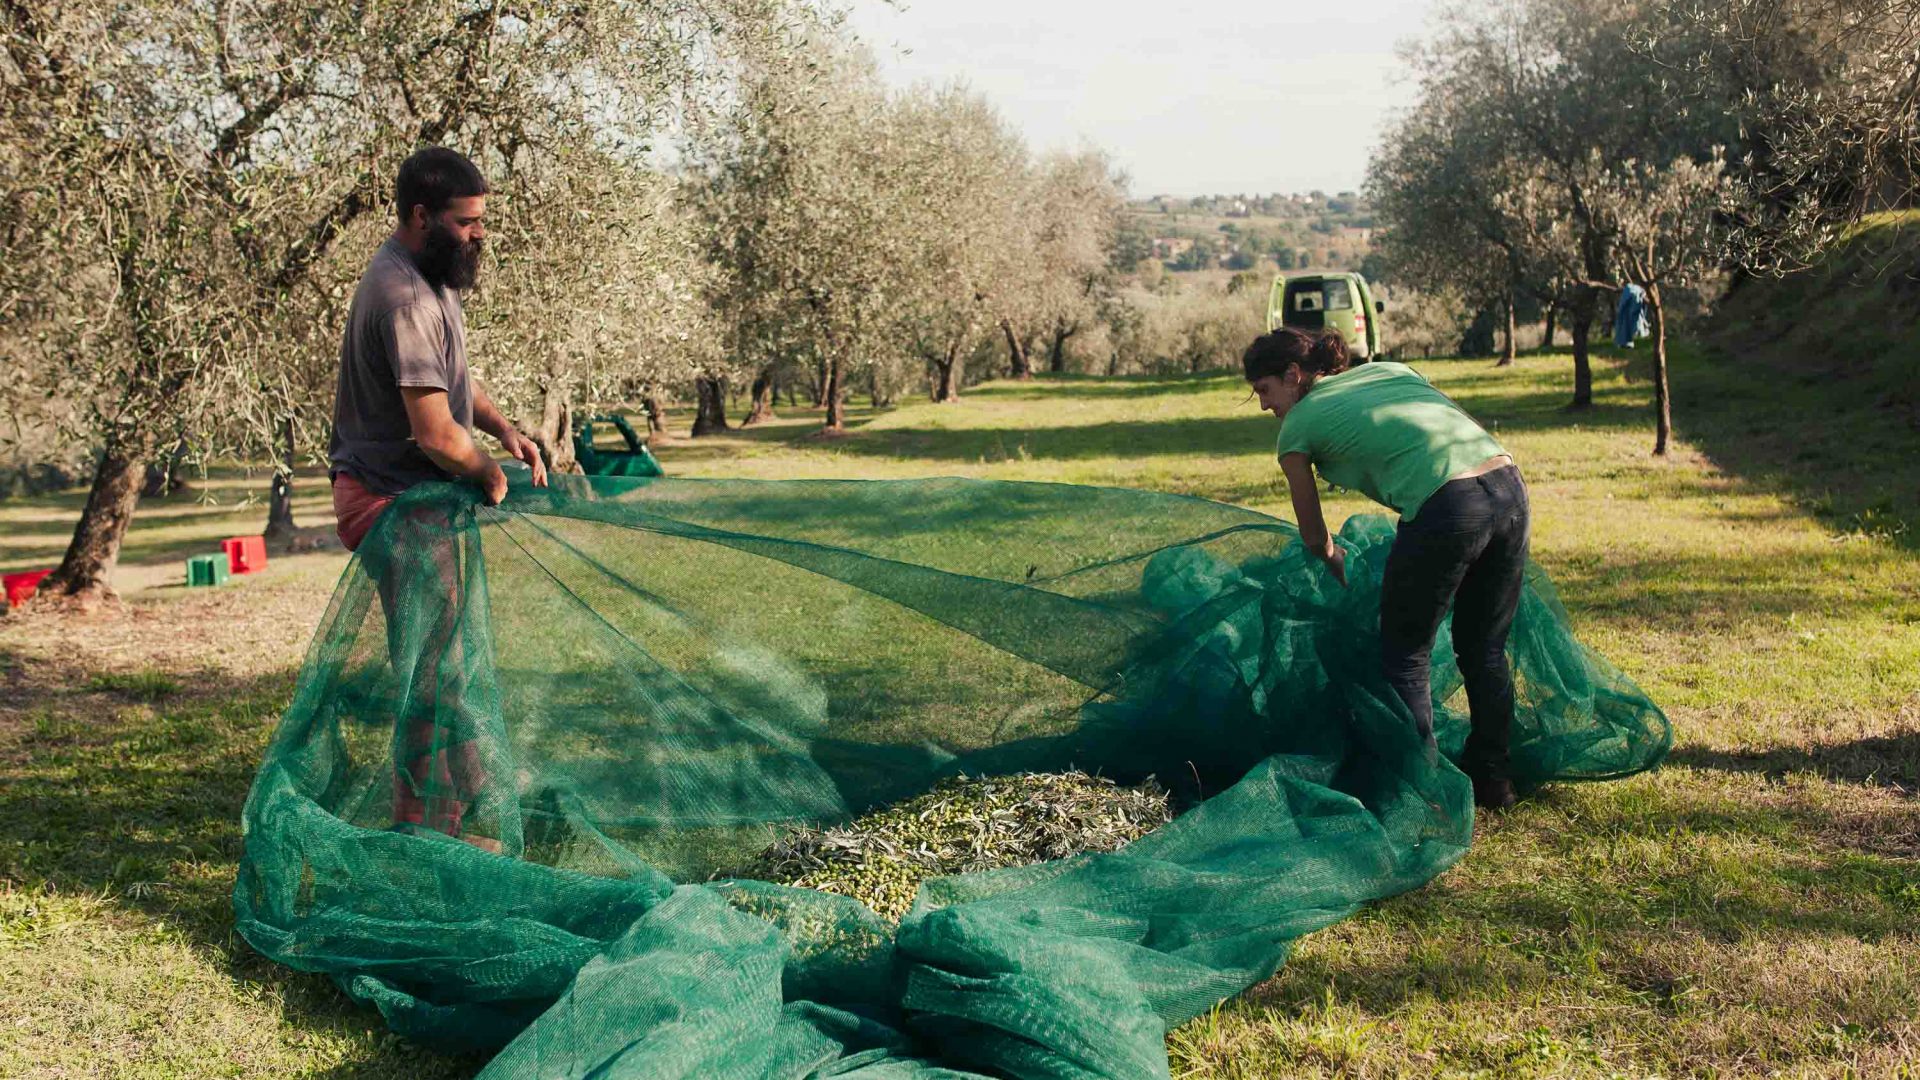 Olive pickers gather their harvest in large nets.